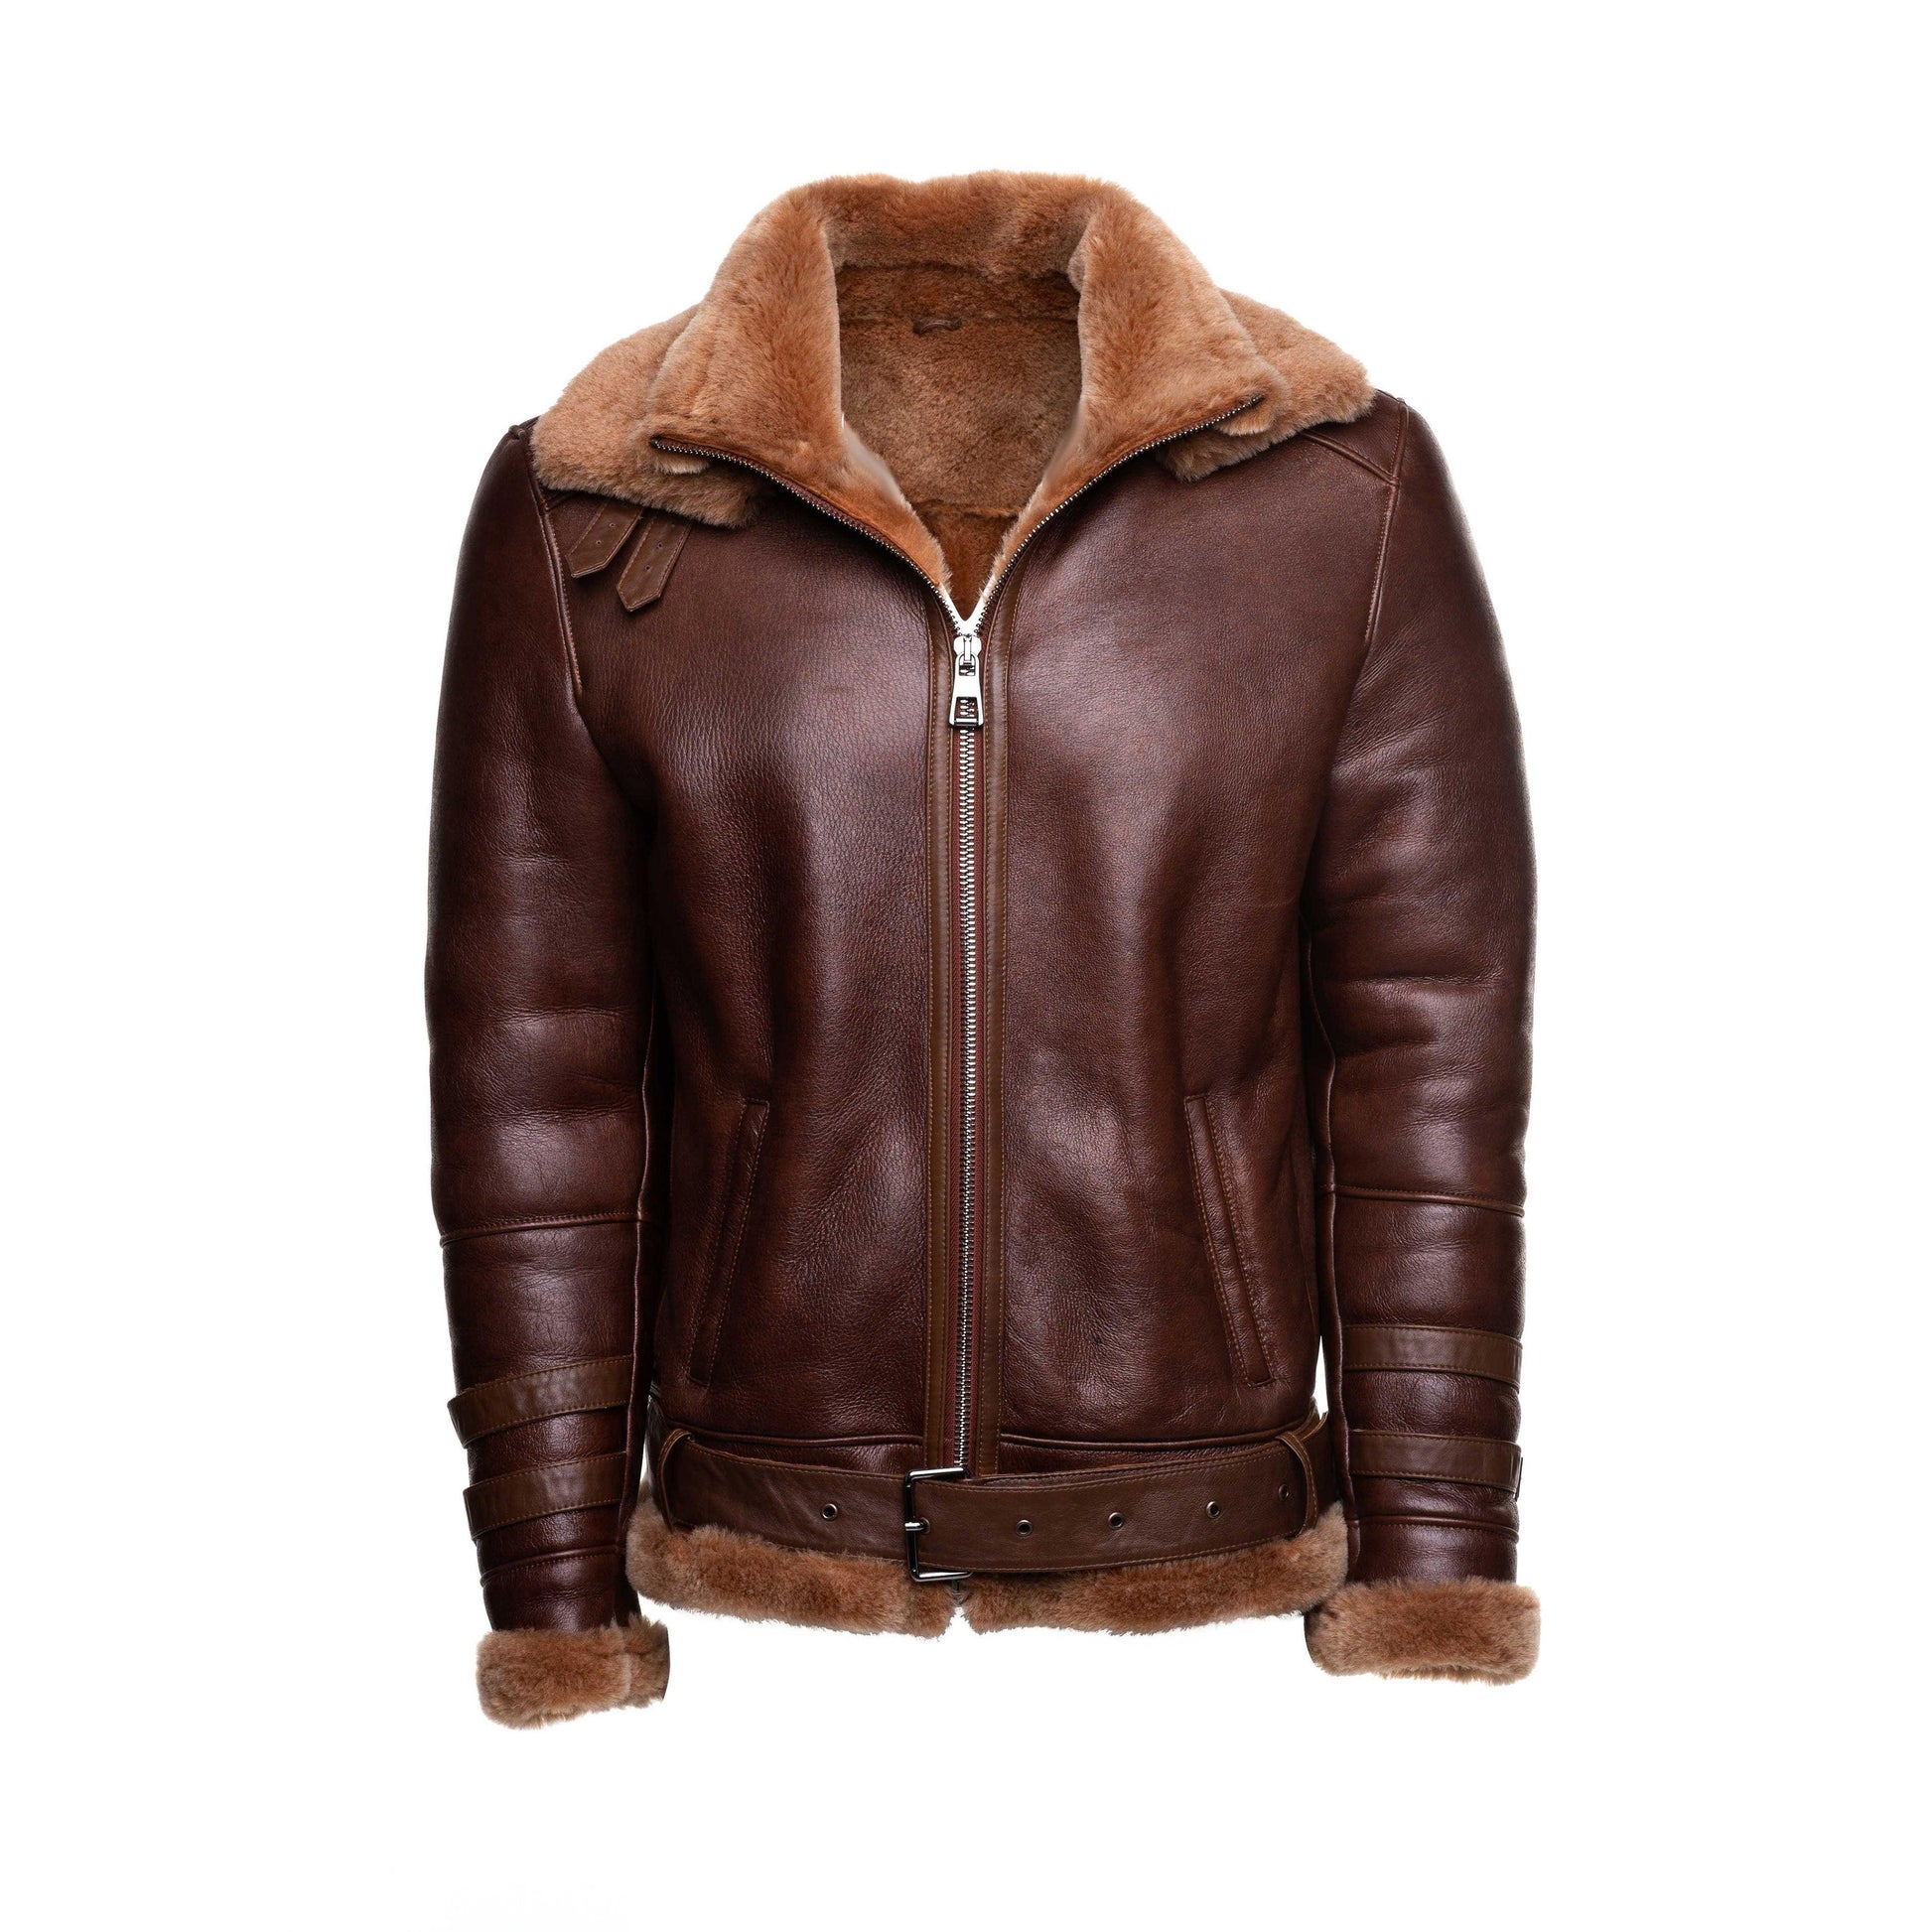 Phan's Aviator Brown bomber shearling jacket with a waist belt - Leather Loom